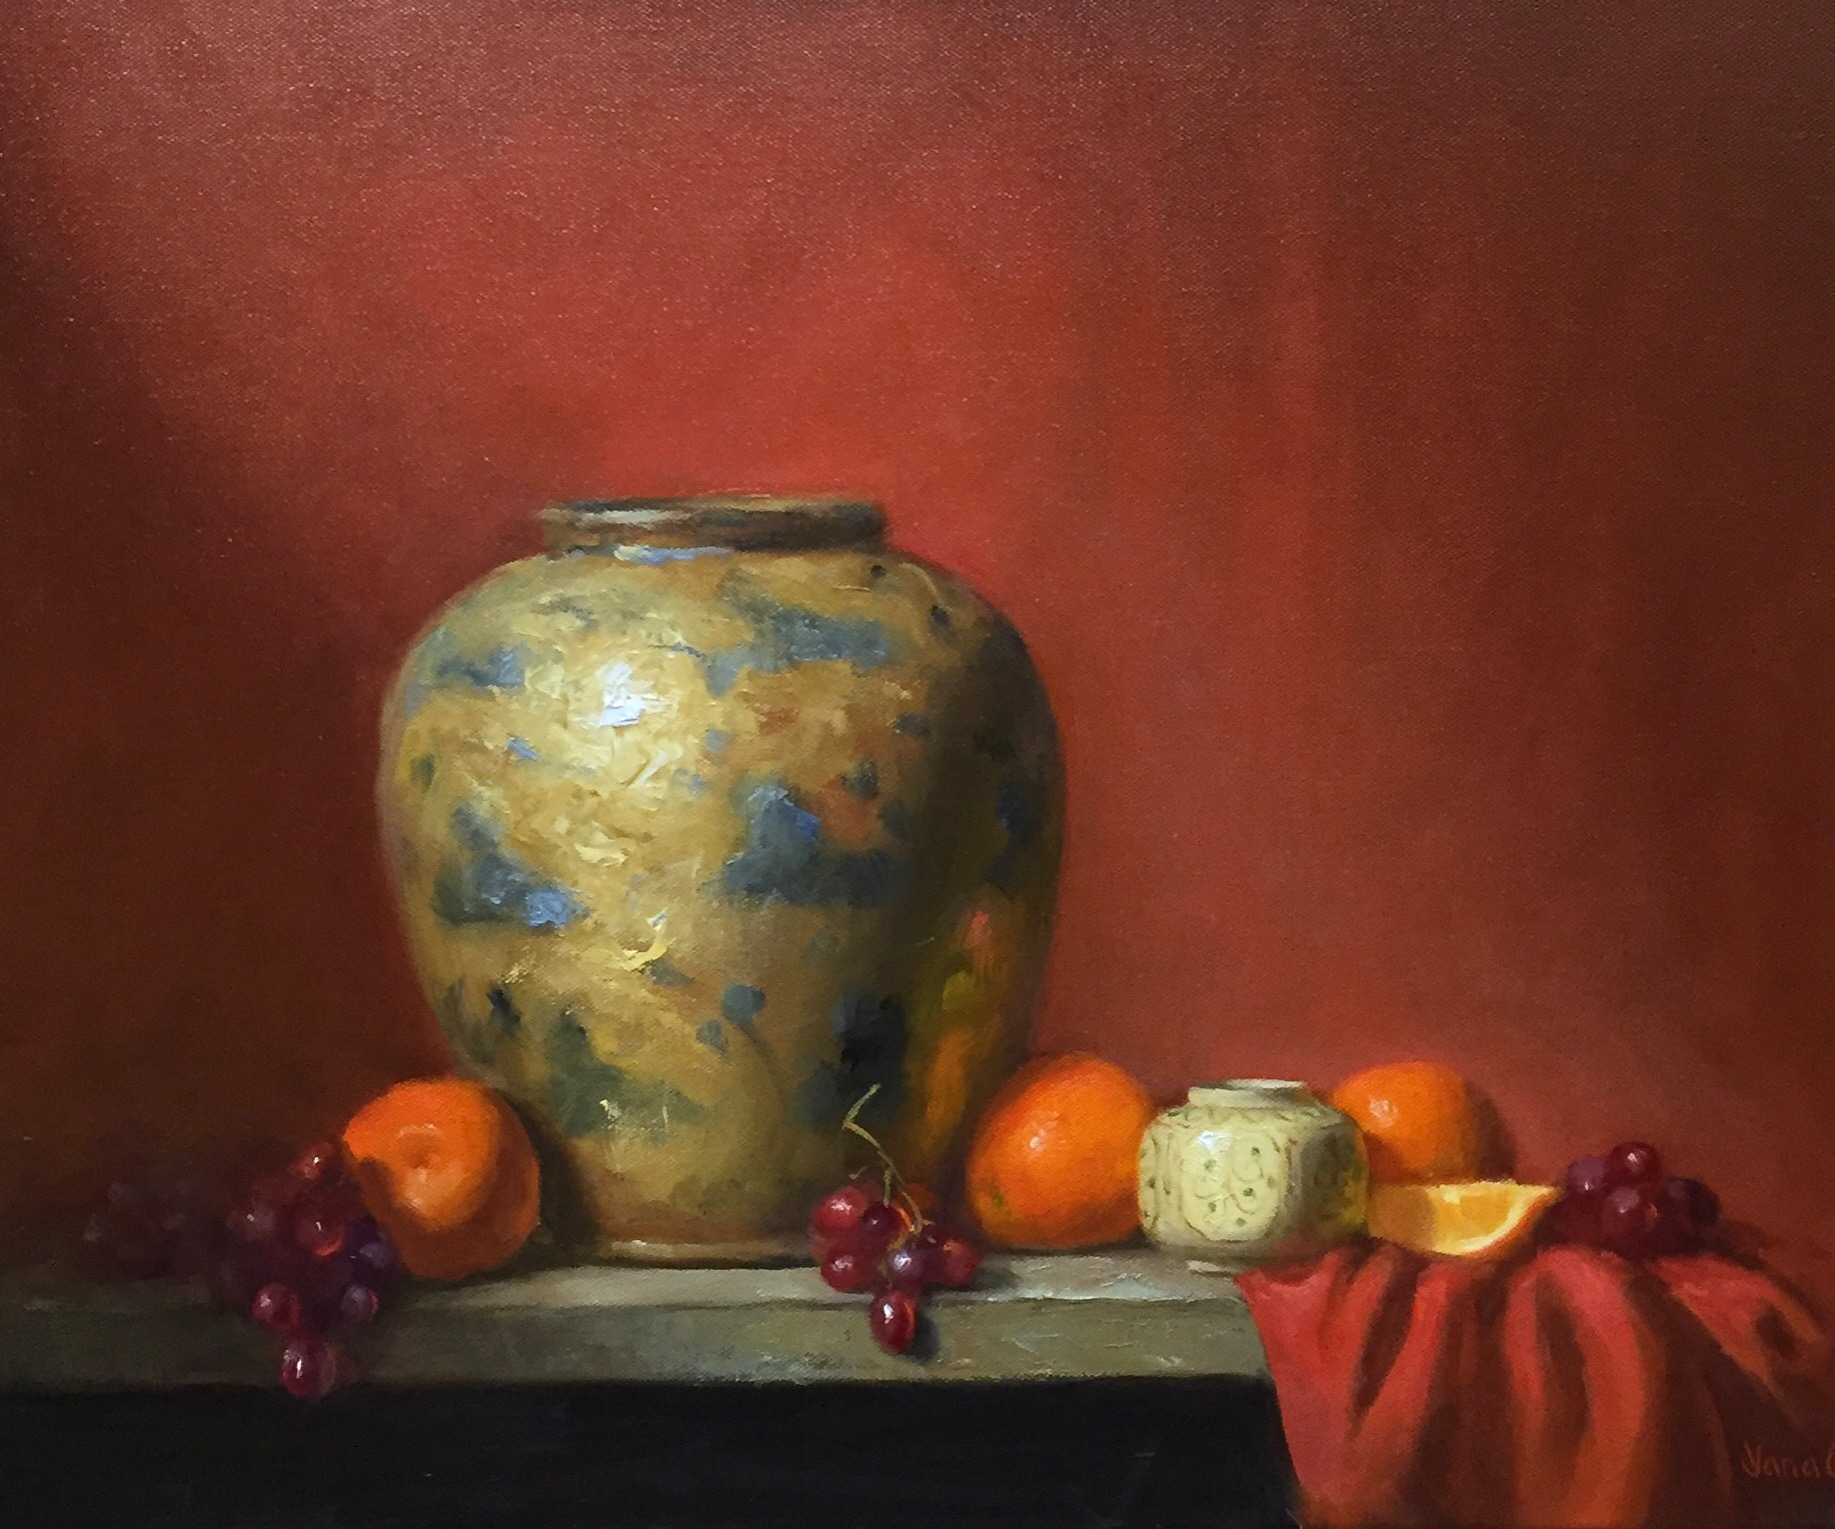 Old vase and oranges 16x20 Oil on canvas